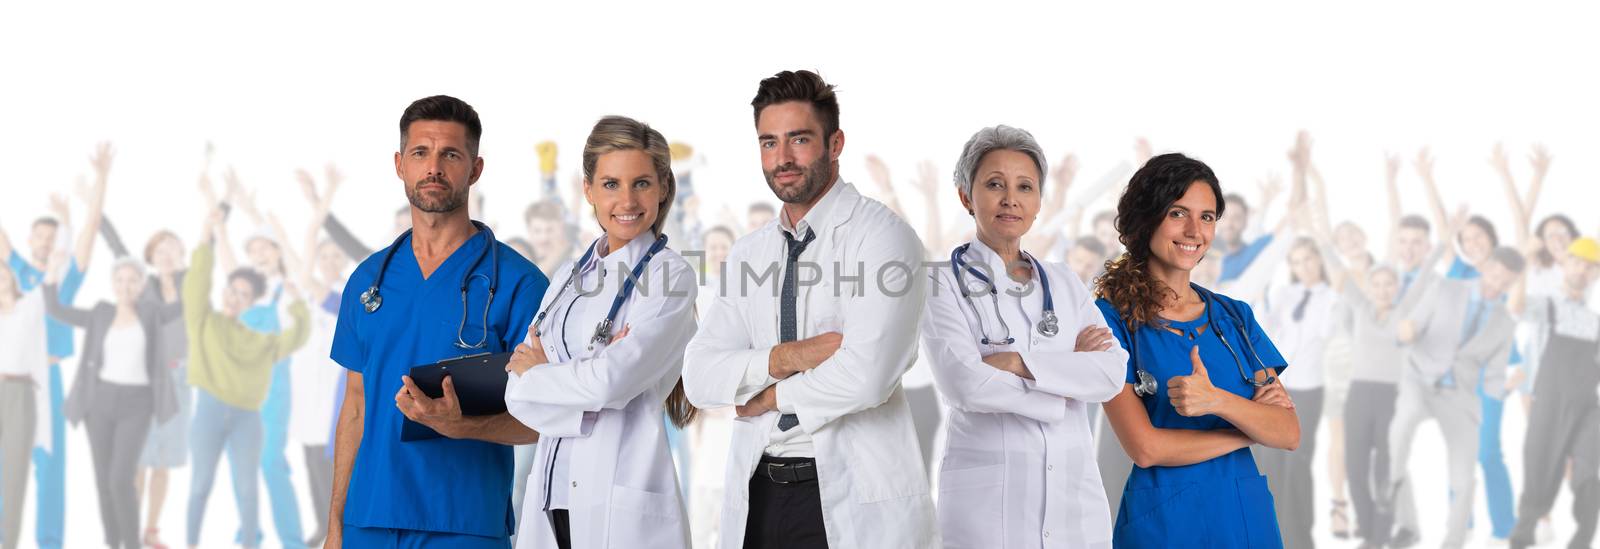 Team of three doctors standing in front of crowd of many people patients isolated on white background medical feat concept